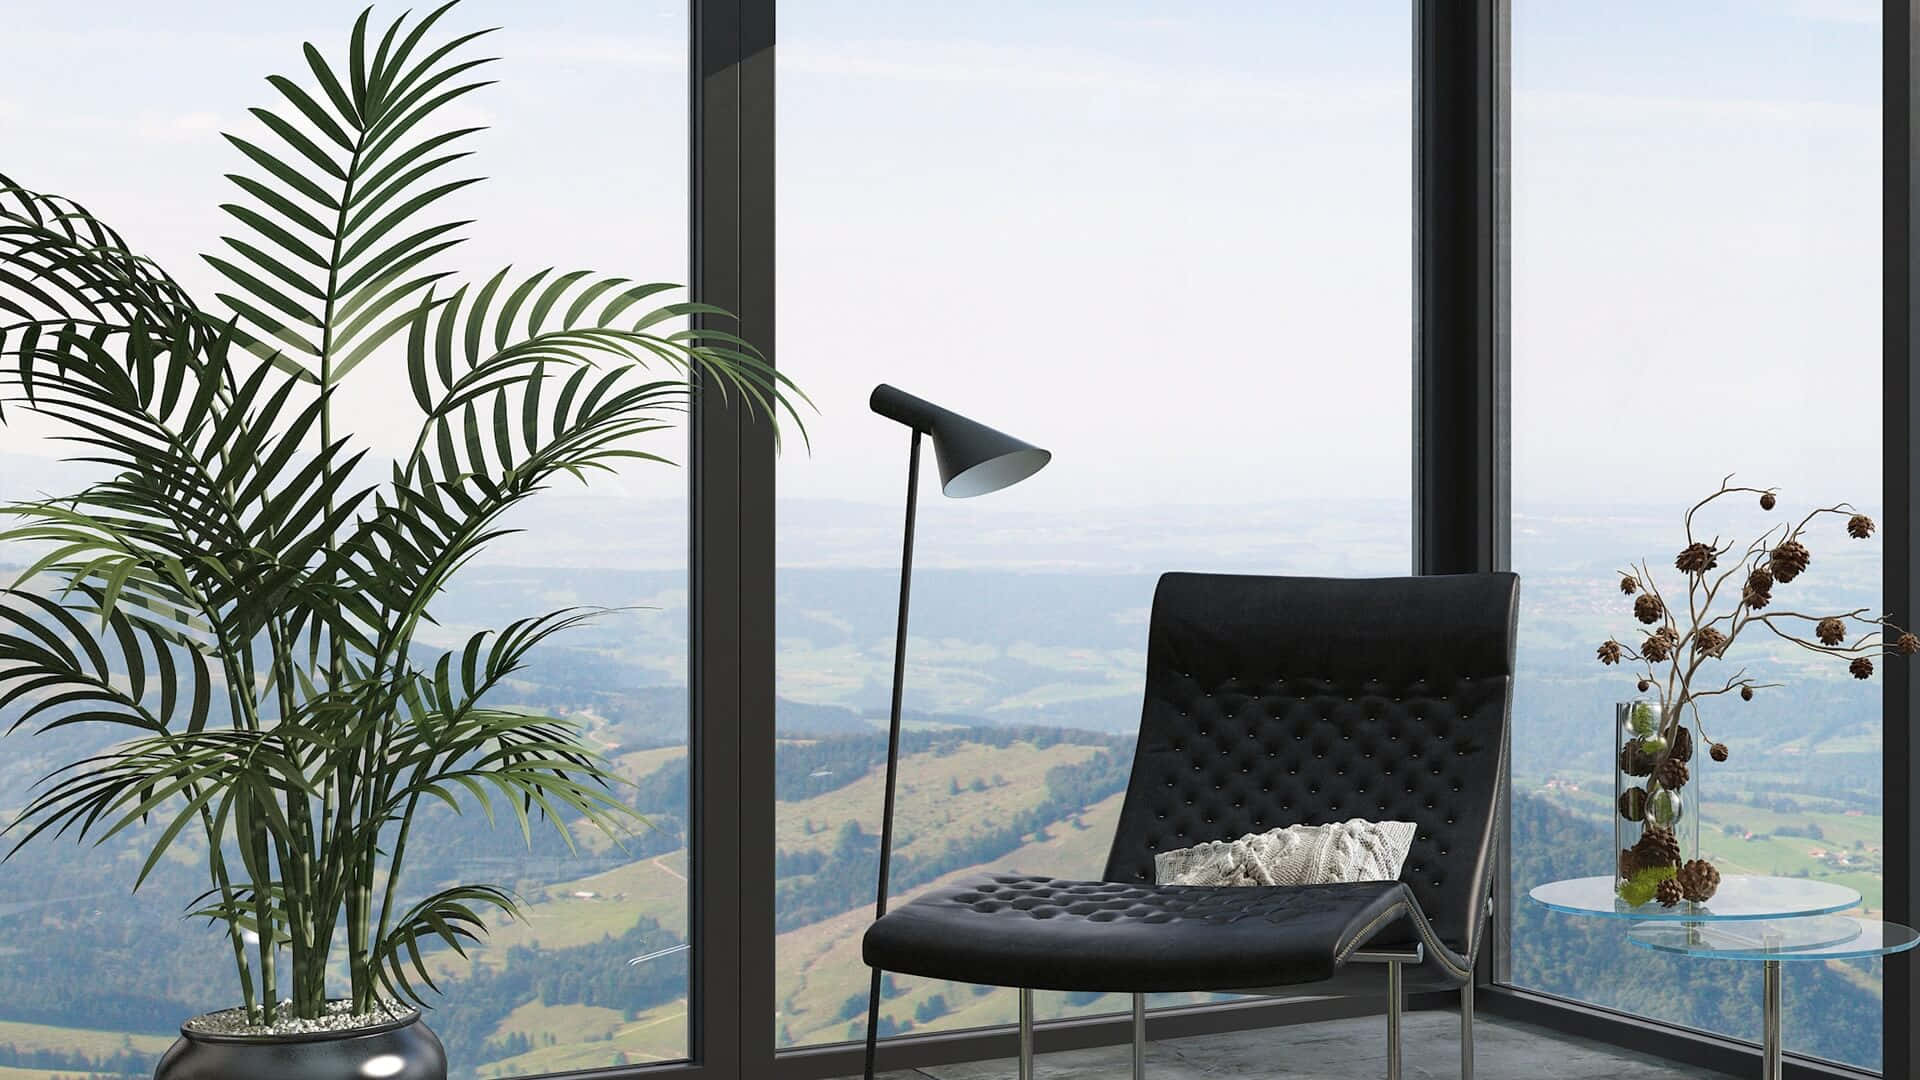 A Black Chair In A Room With A View